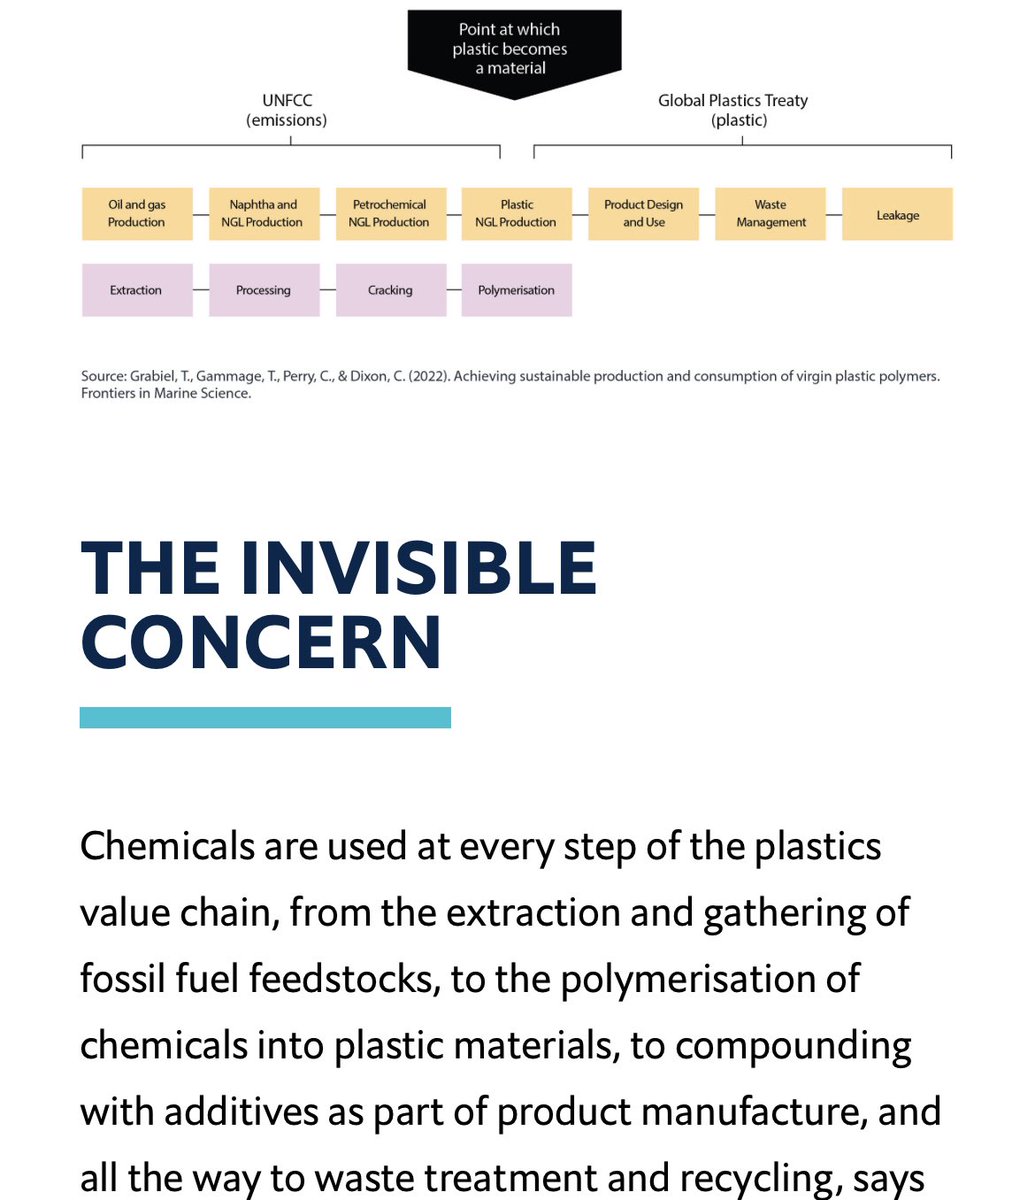 Plastics are made with chemicals, many are toxic and harm@human health, so: How will the #PlasticsTreaty address the Plastics Value Chain? & the Plastics Liability Chain? Read @economistimpact brief on #toxics, plastics & policy views backtoblueinitiative.com/a-long-and-win… #toxicplastics